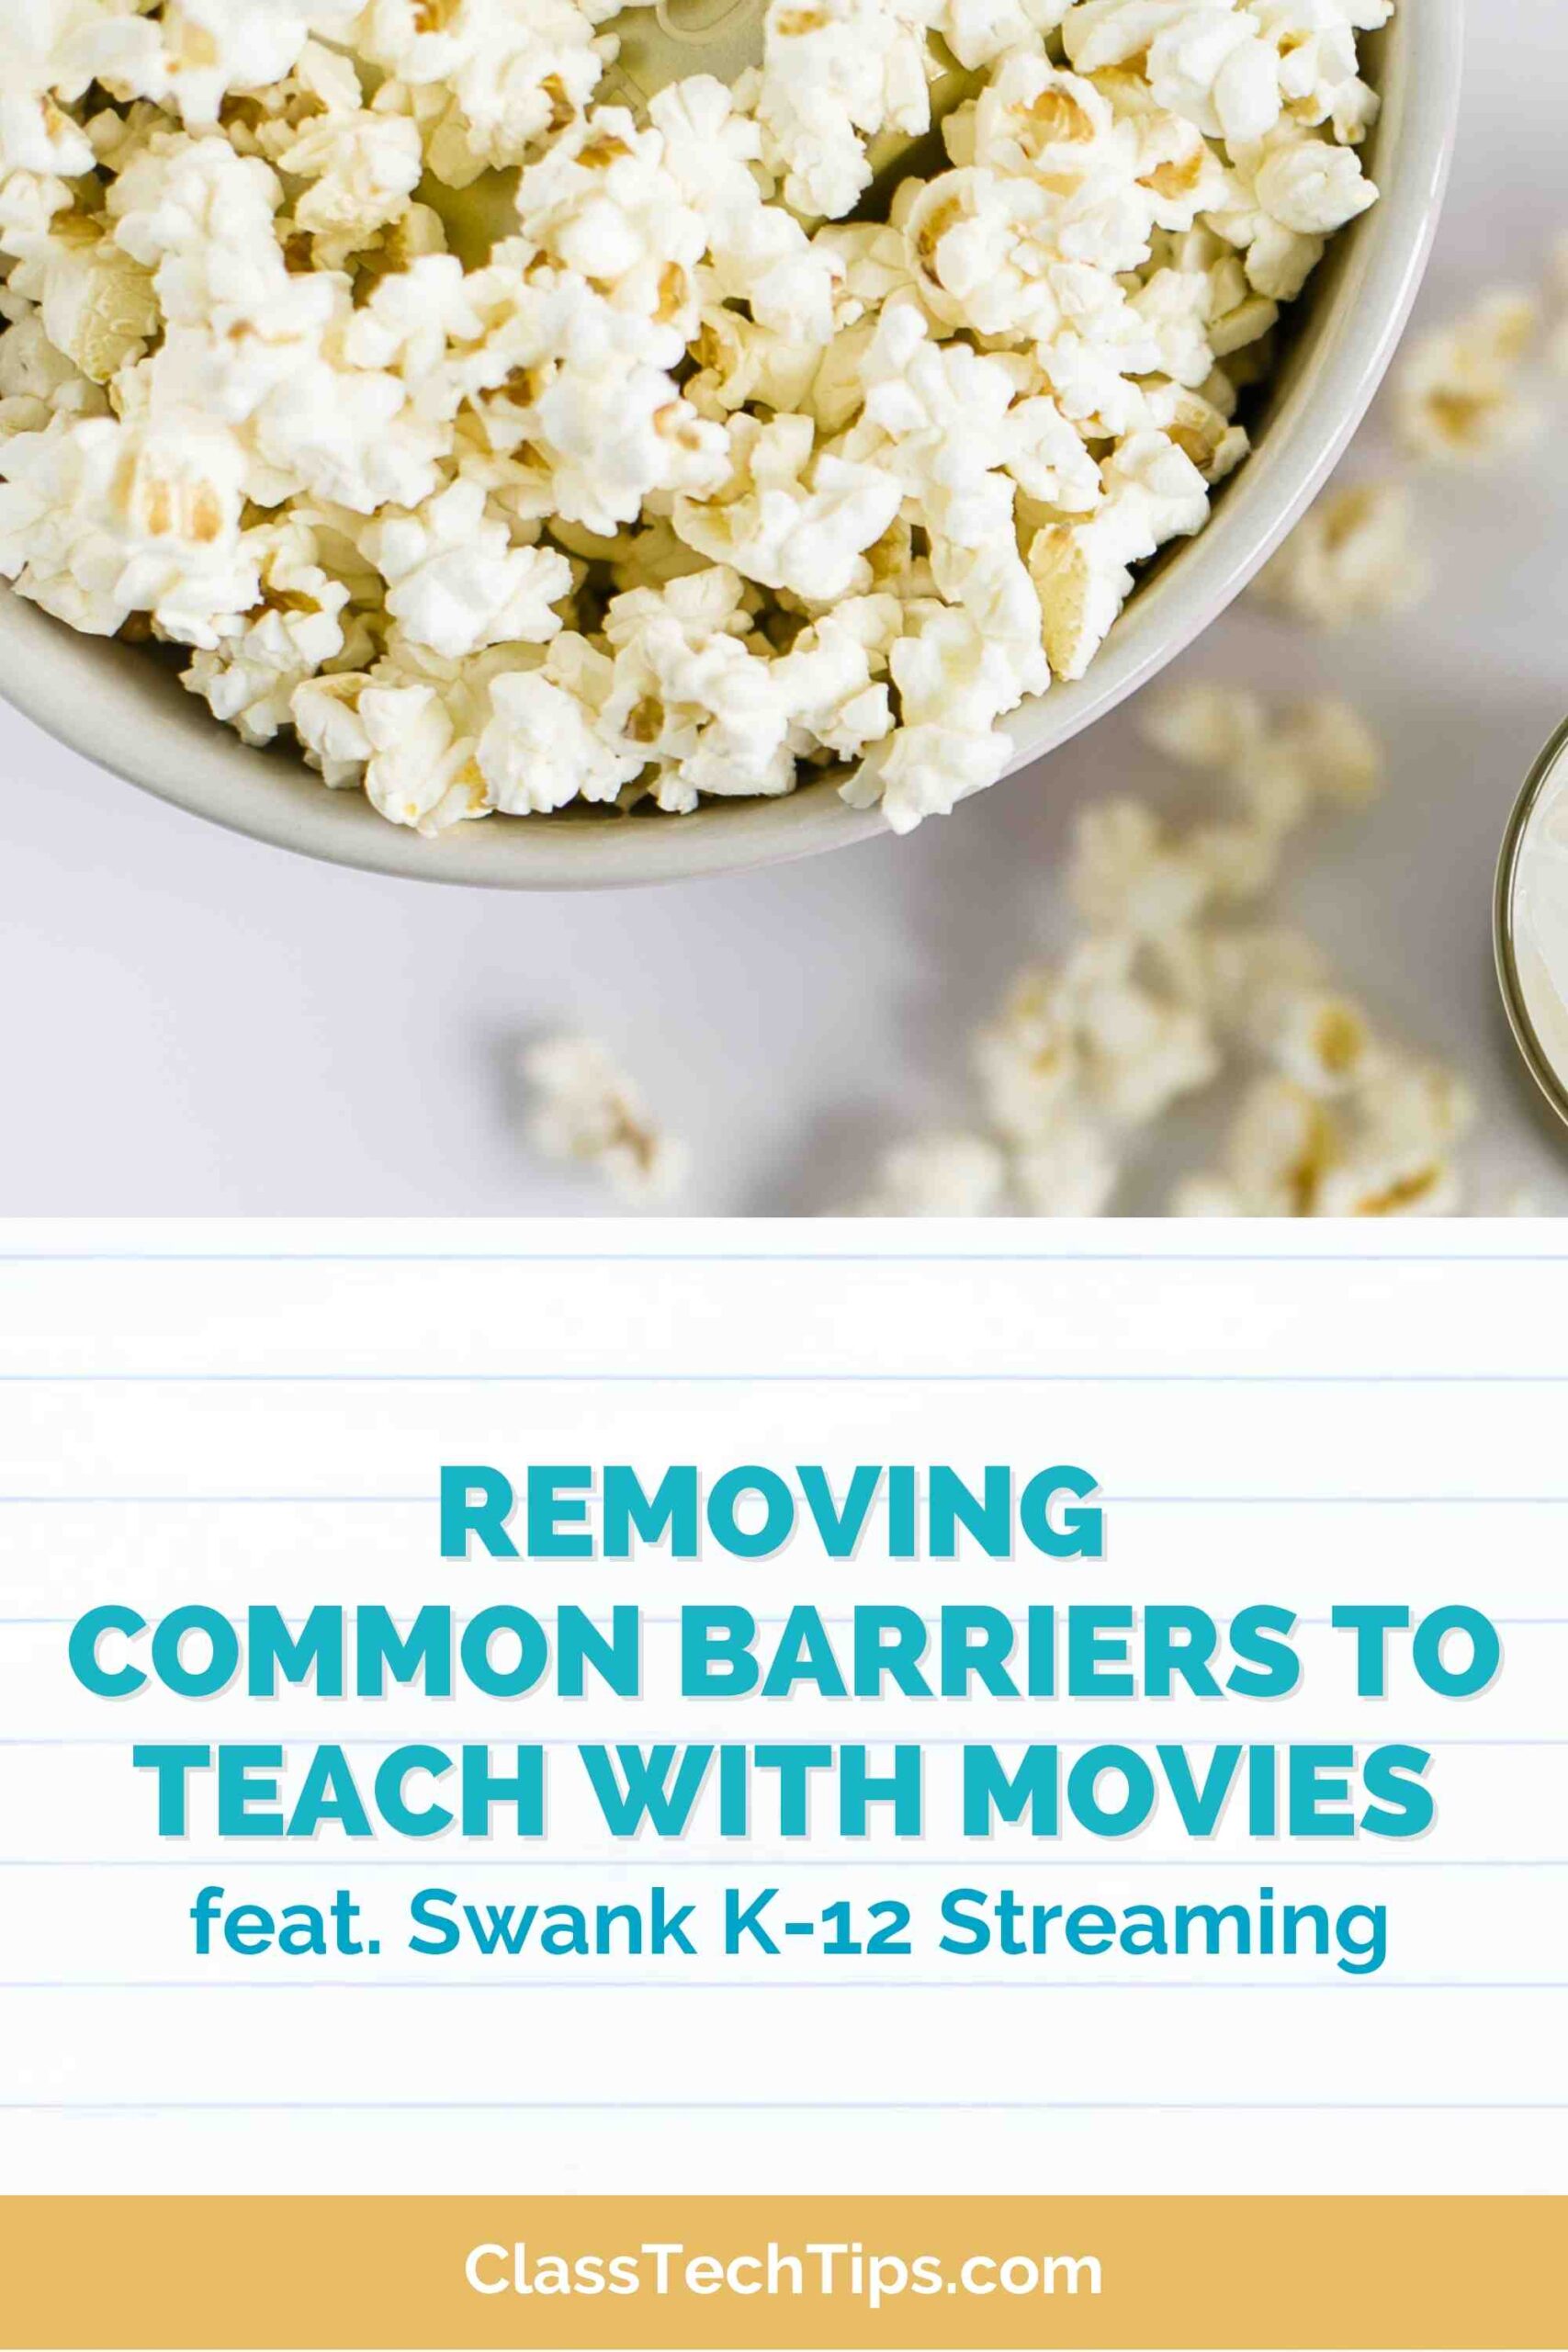 Teach with Movies Image Pinterest